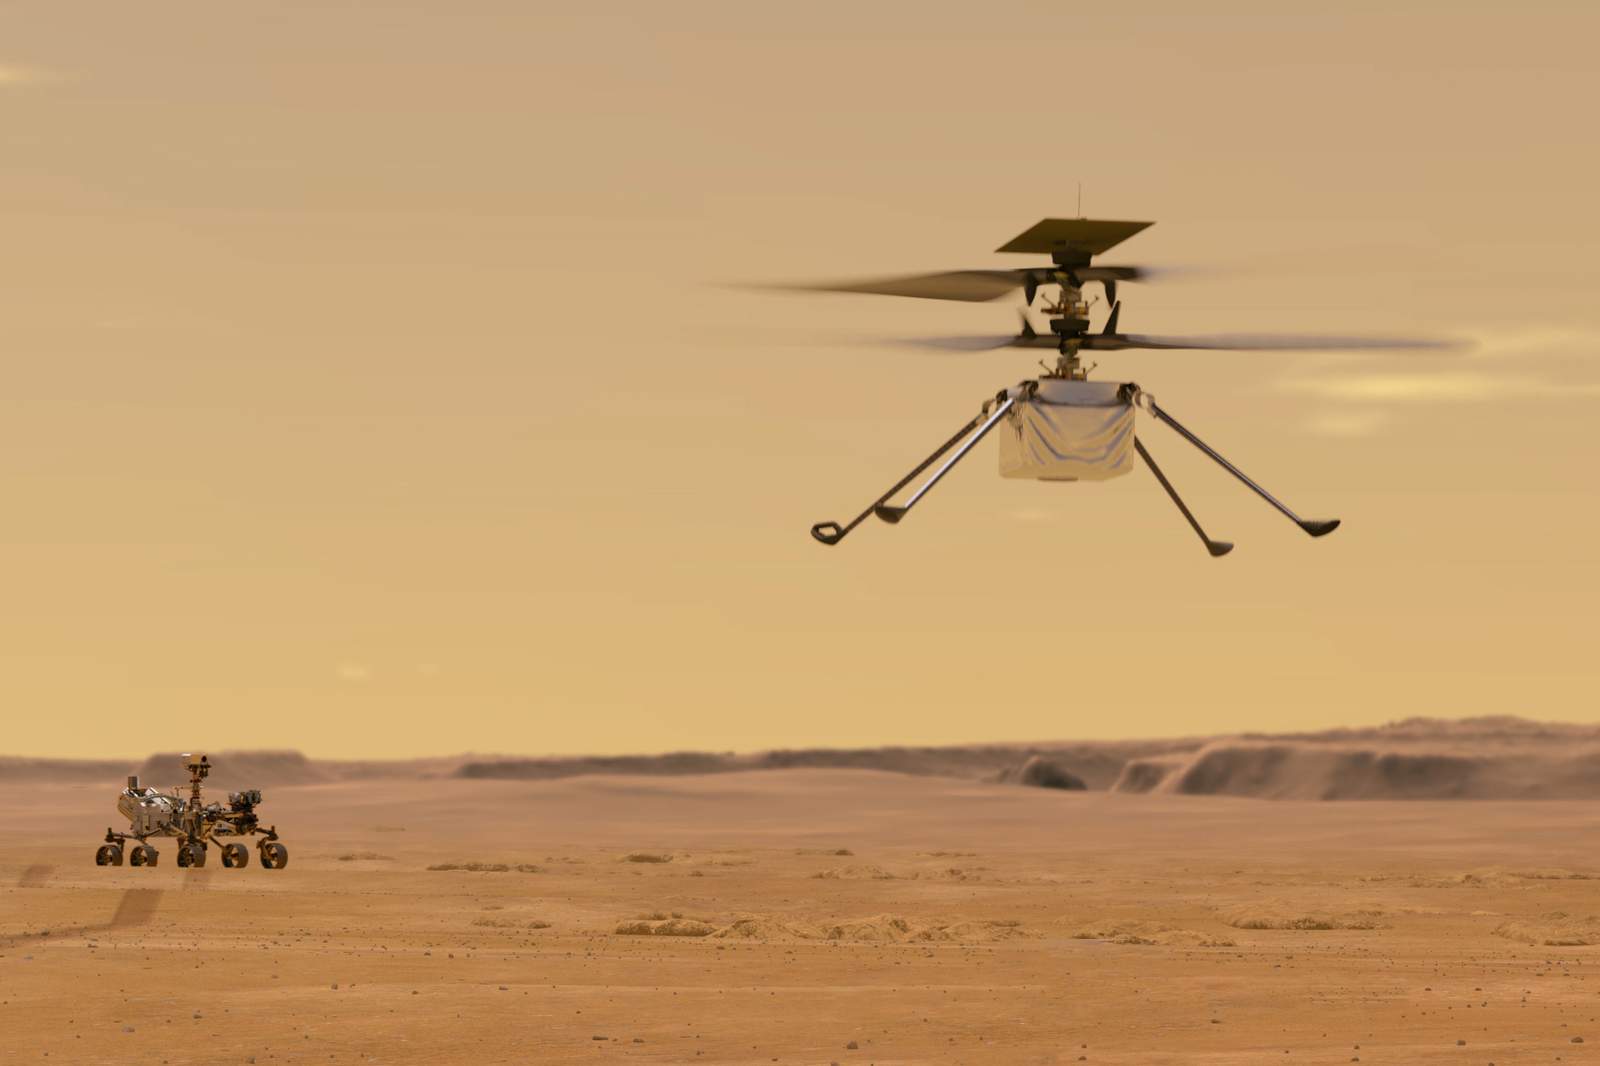 Cleared for takeoff: NASA’s first Mars helicopter flight will happen Monday morning